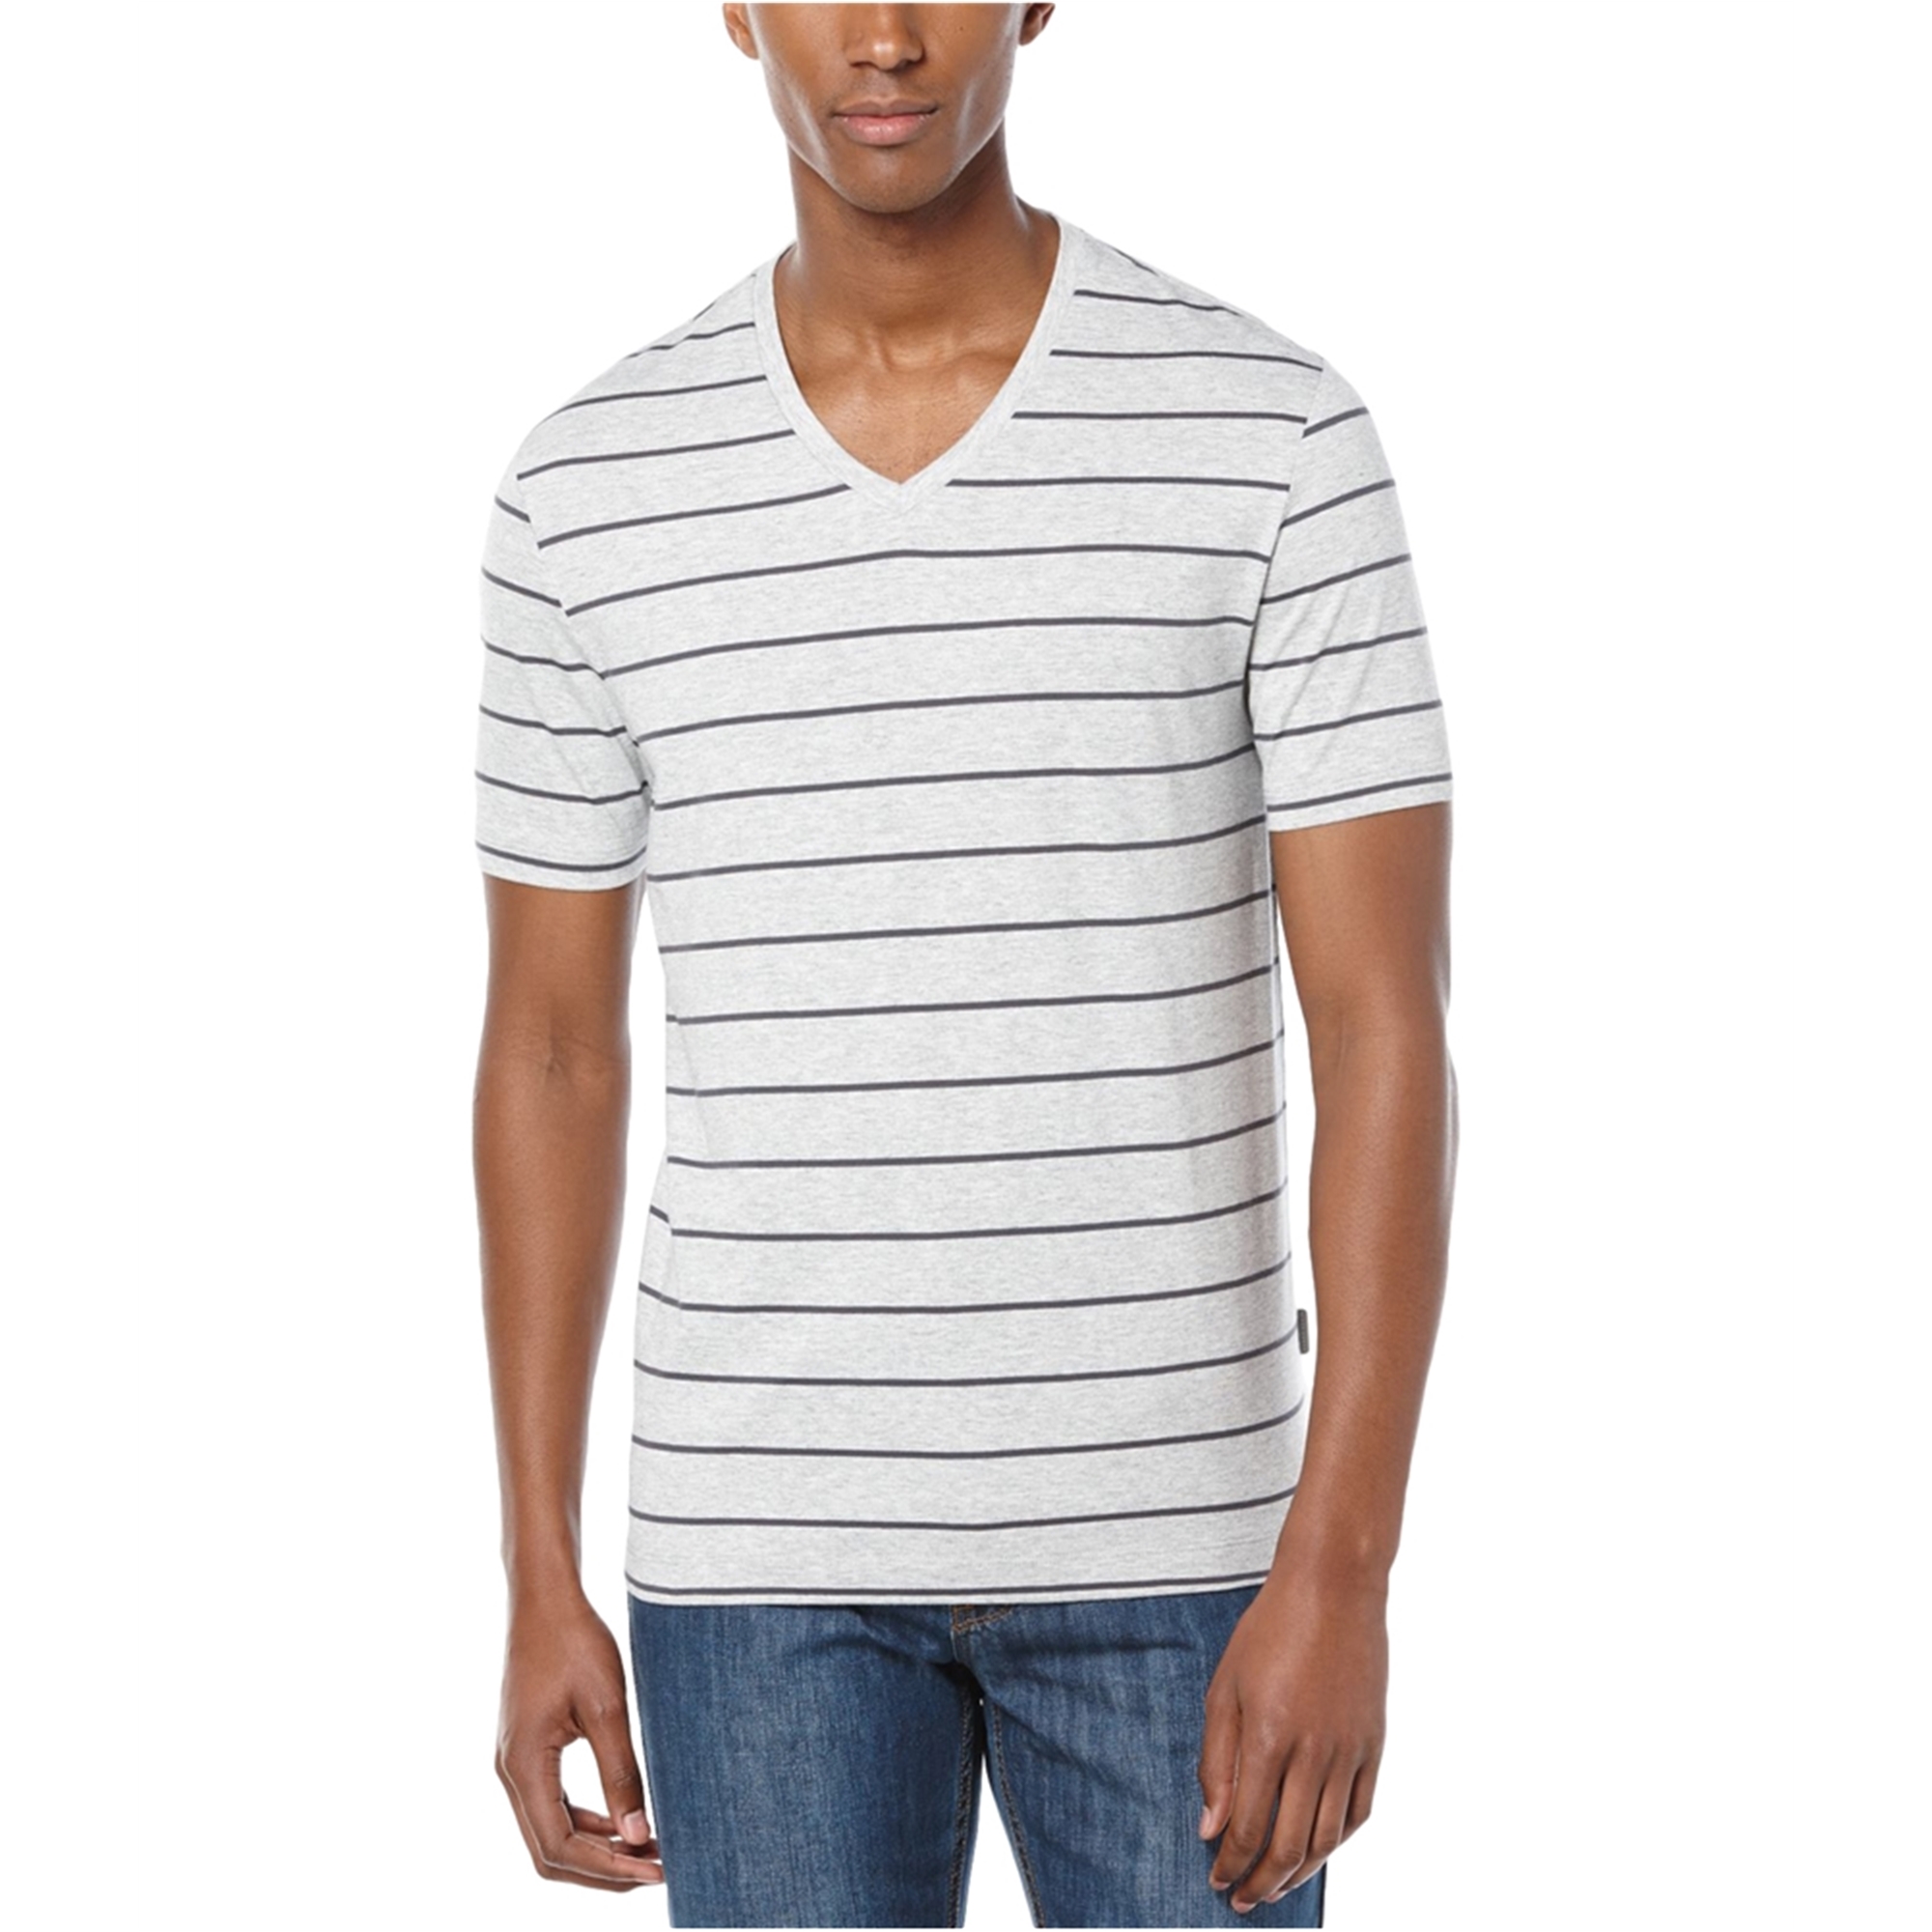 Perry Ellis Mens Wide Stripe V Graphic T-Shirt, Grey, Small - image 1 of 2